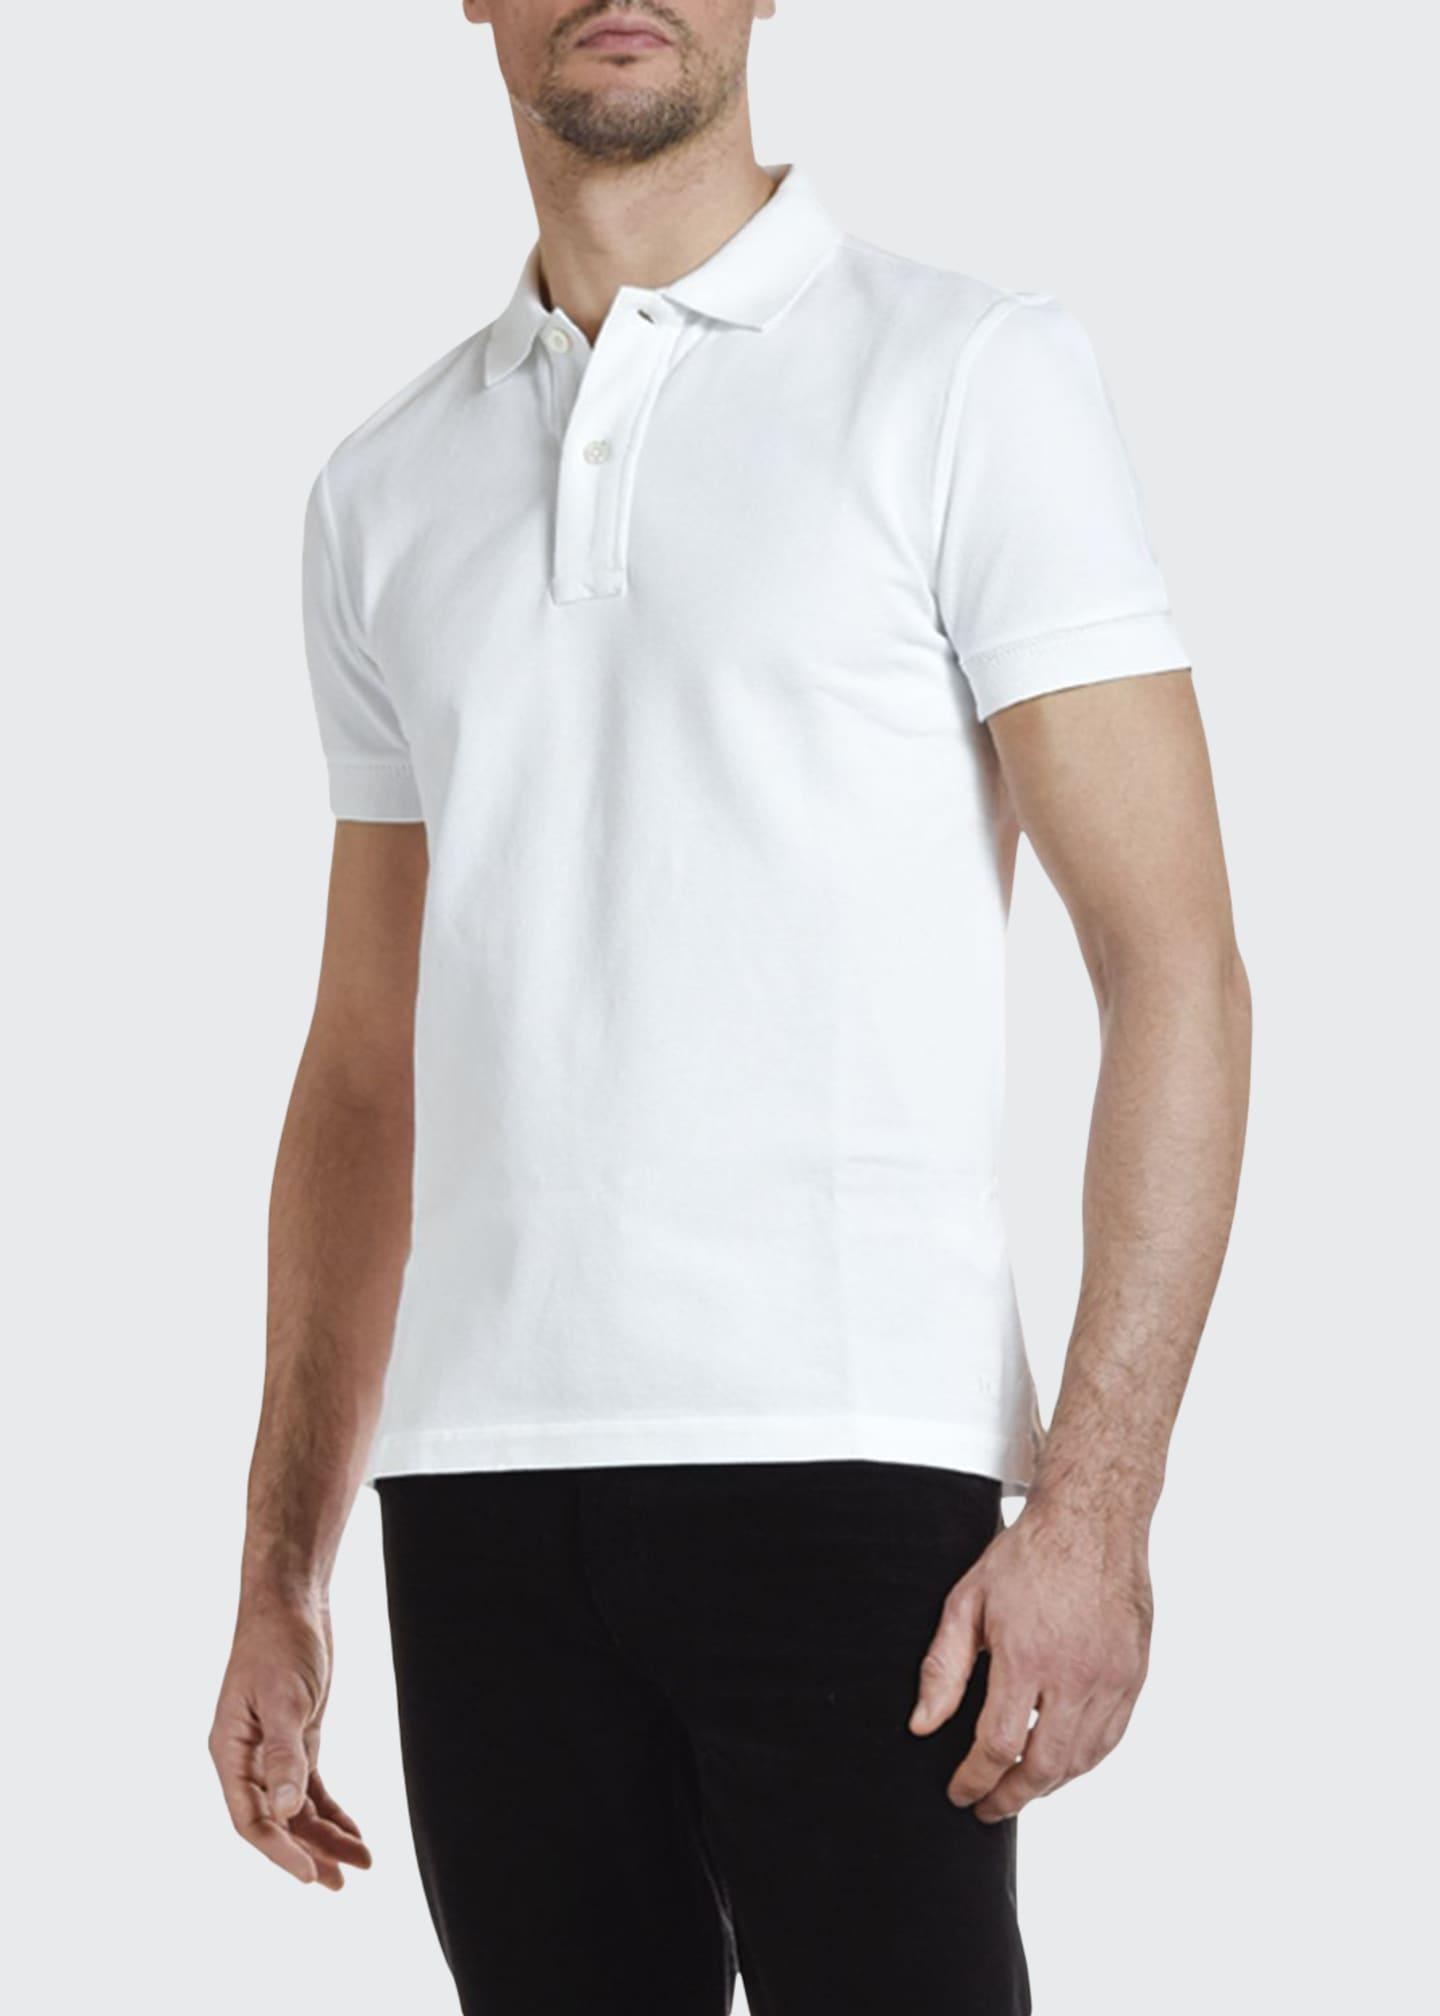 Tom Ford Cotton Men's Pique-knit Polo Shirt in White for Men - Lyst